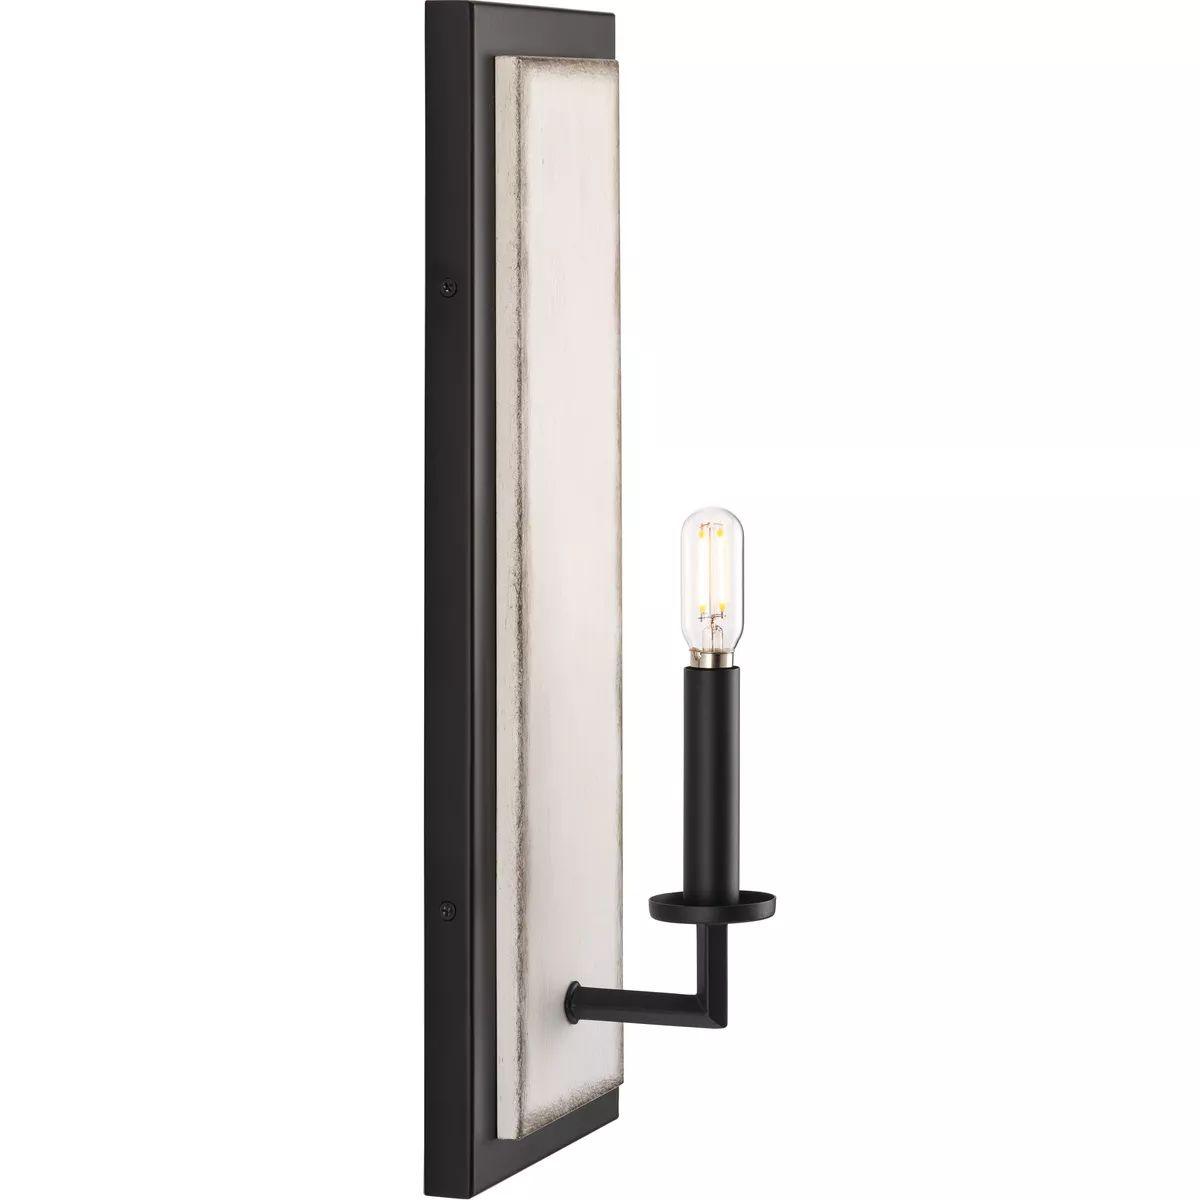 Galloway 18 in. Wall Sconce